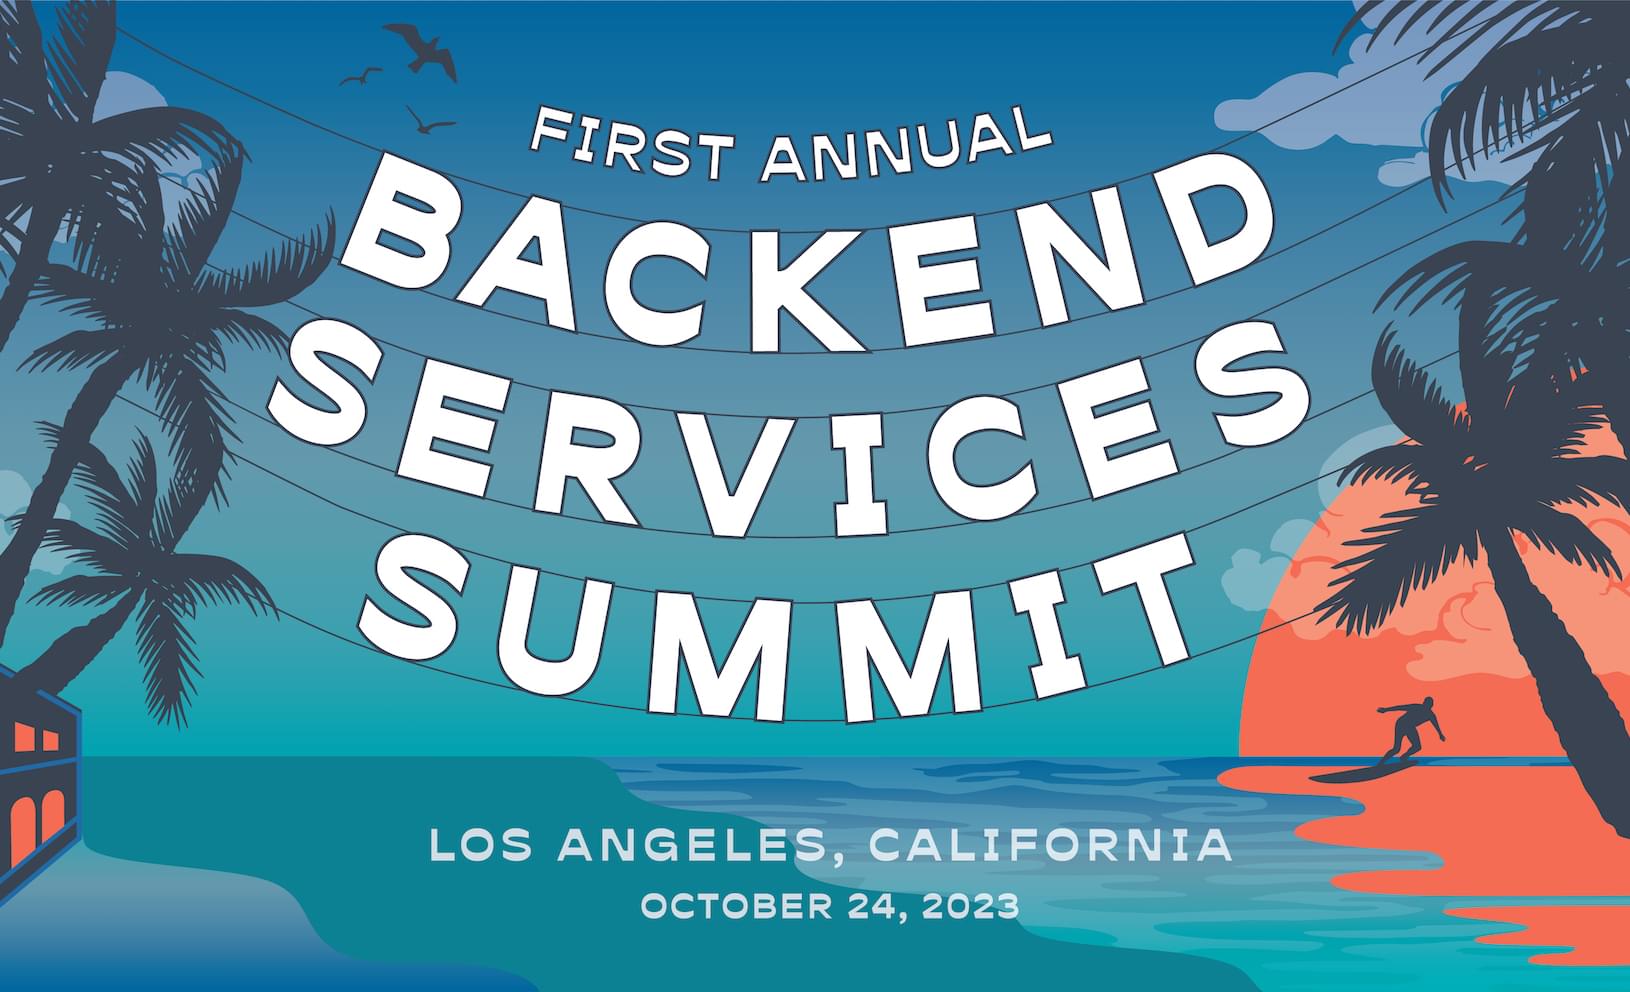 Backend Services Summit